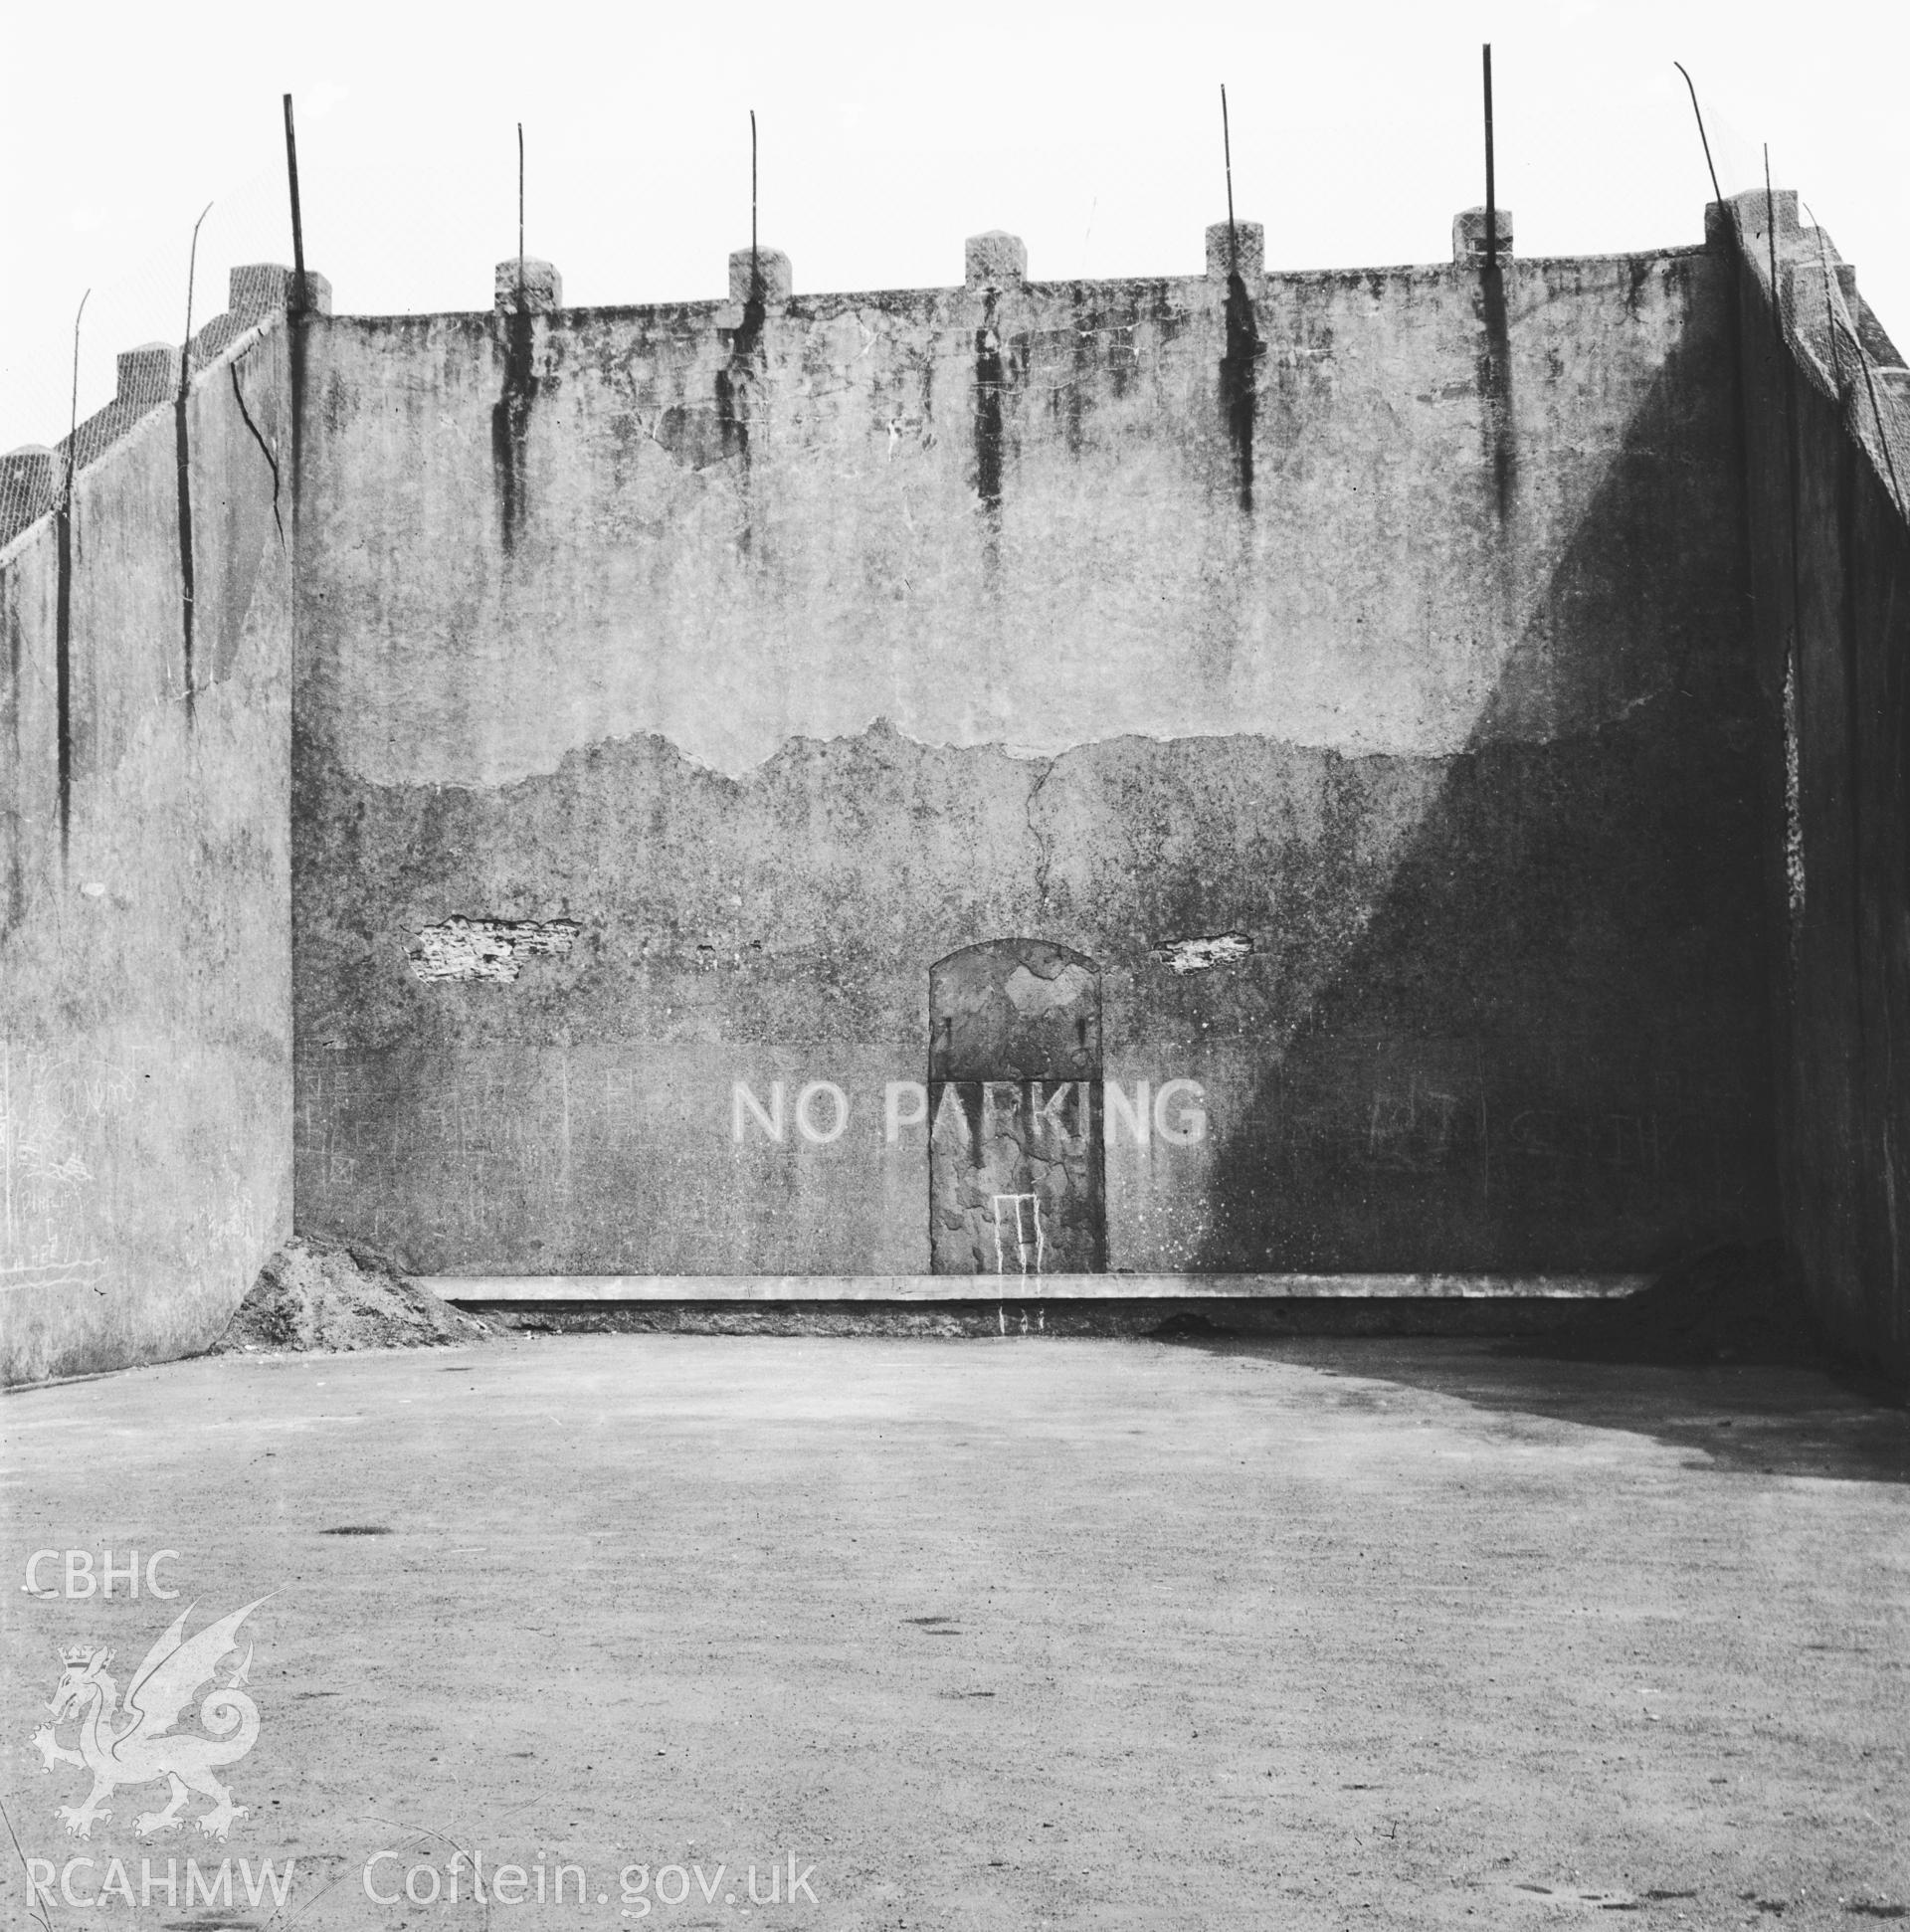 Nelson Handball Court, Caerphilly; one black and white photograph taken by RCAHMW 1965